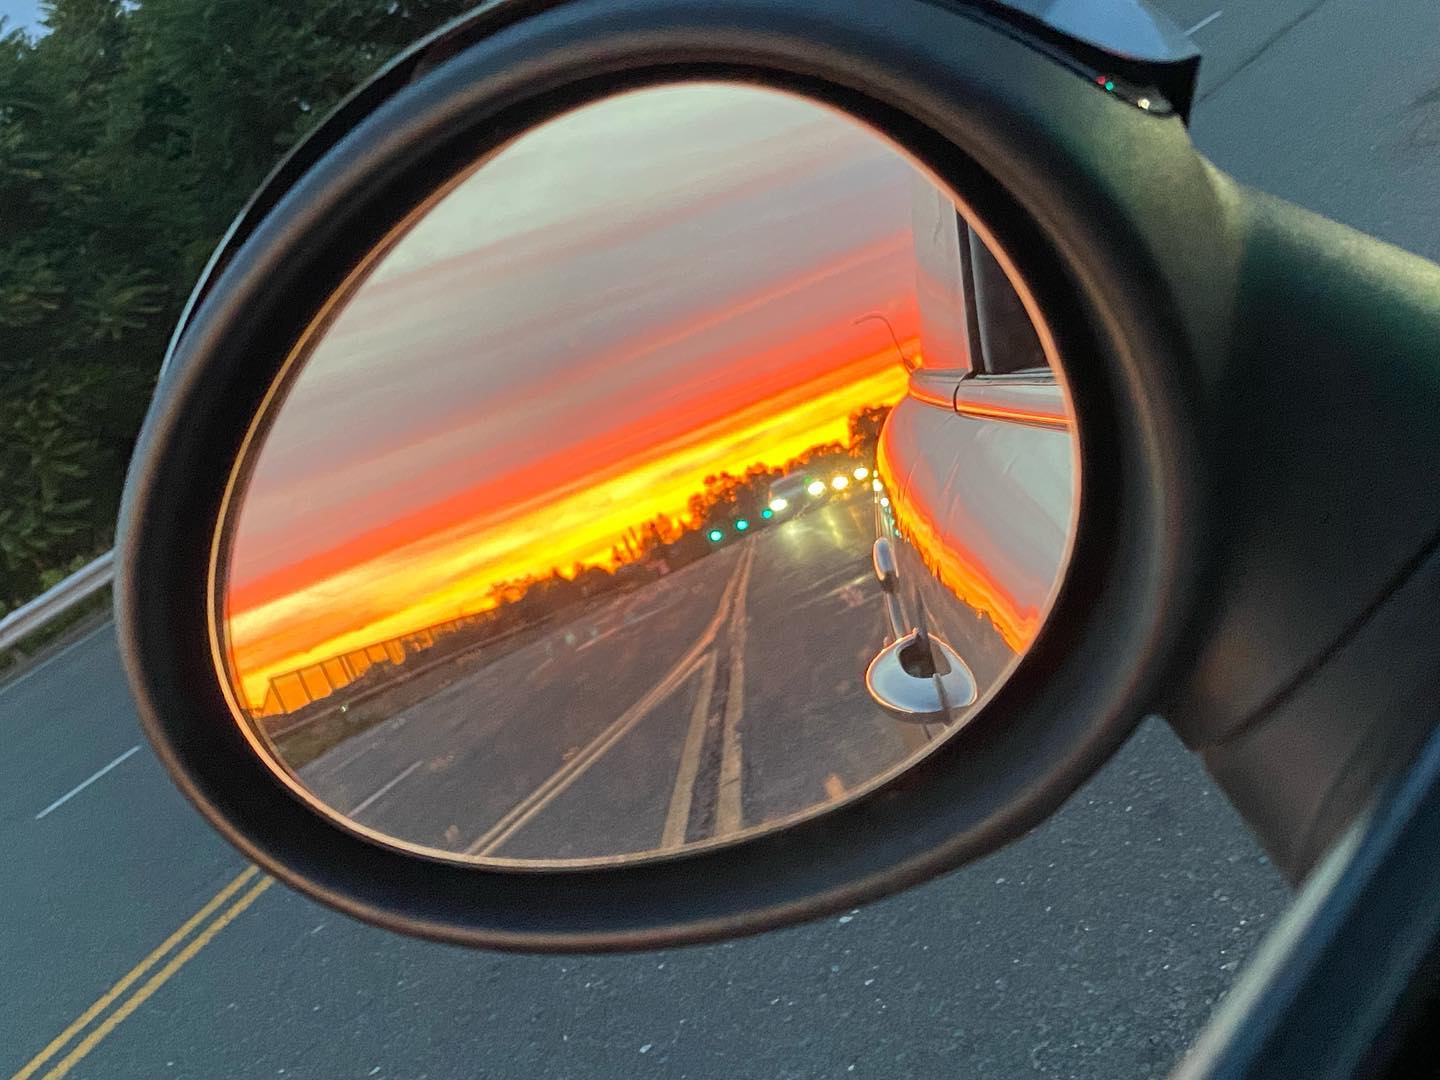 Sunsets from bubbas side mirror 😻😻